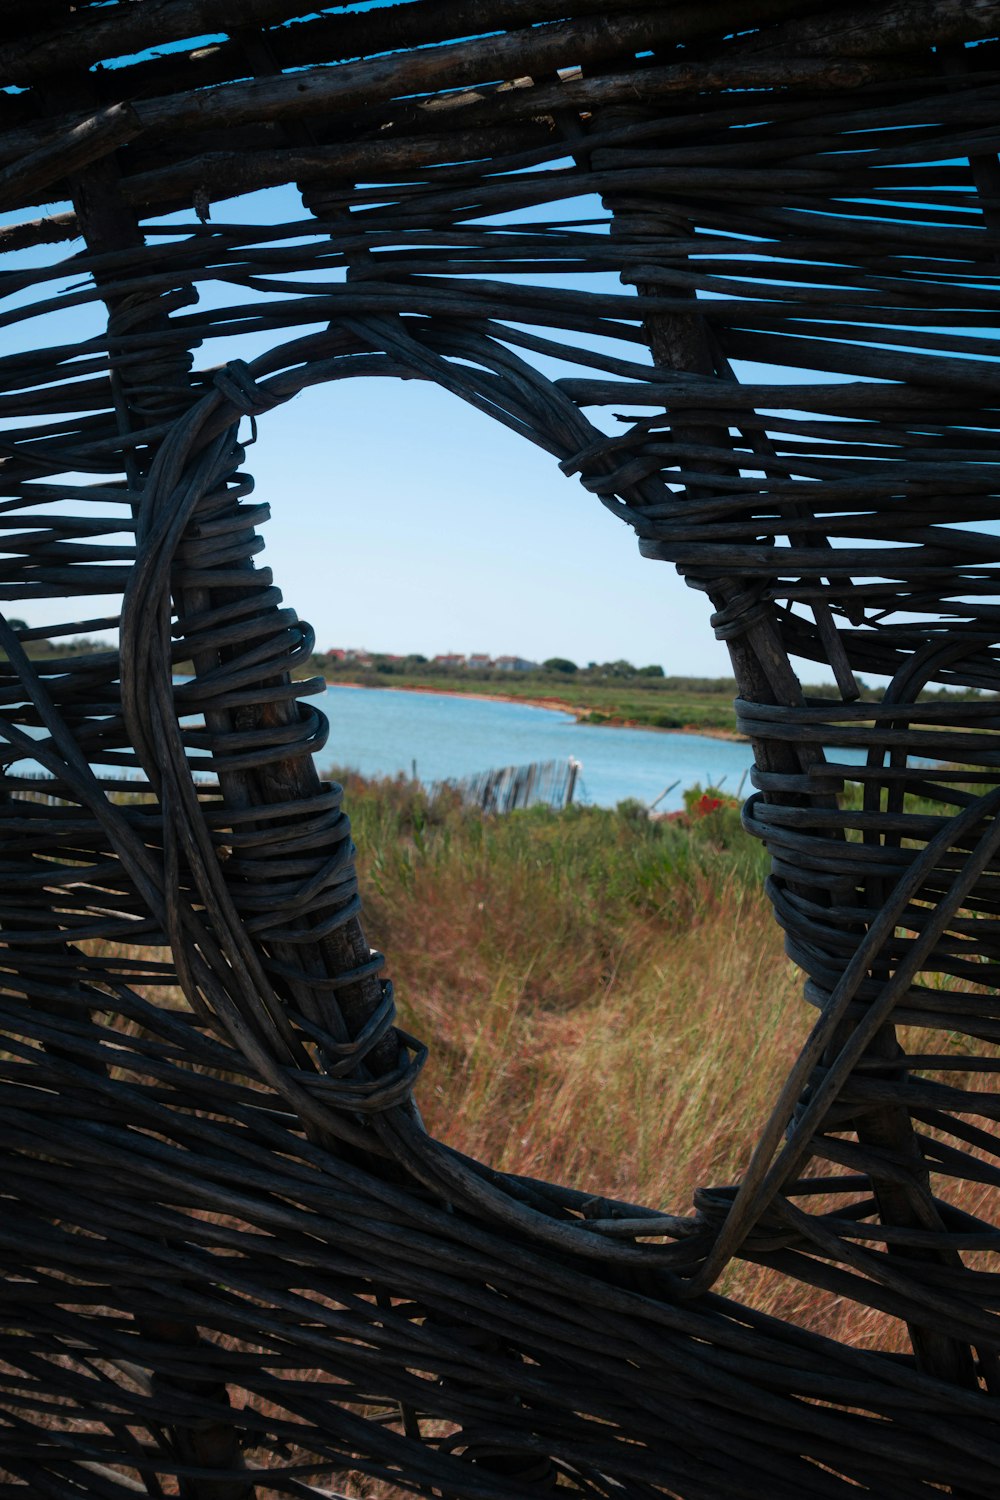 a view of a body of water through a woven basket